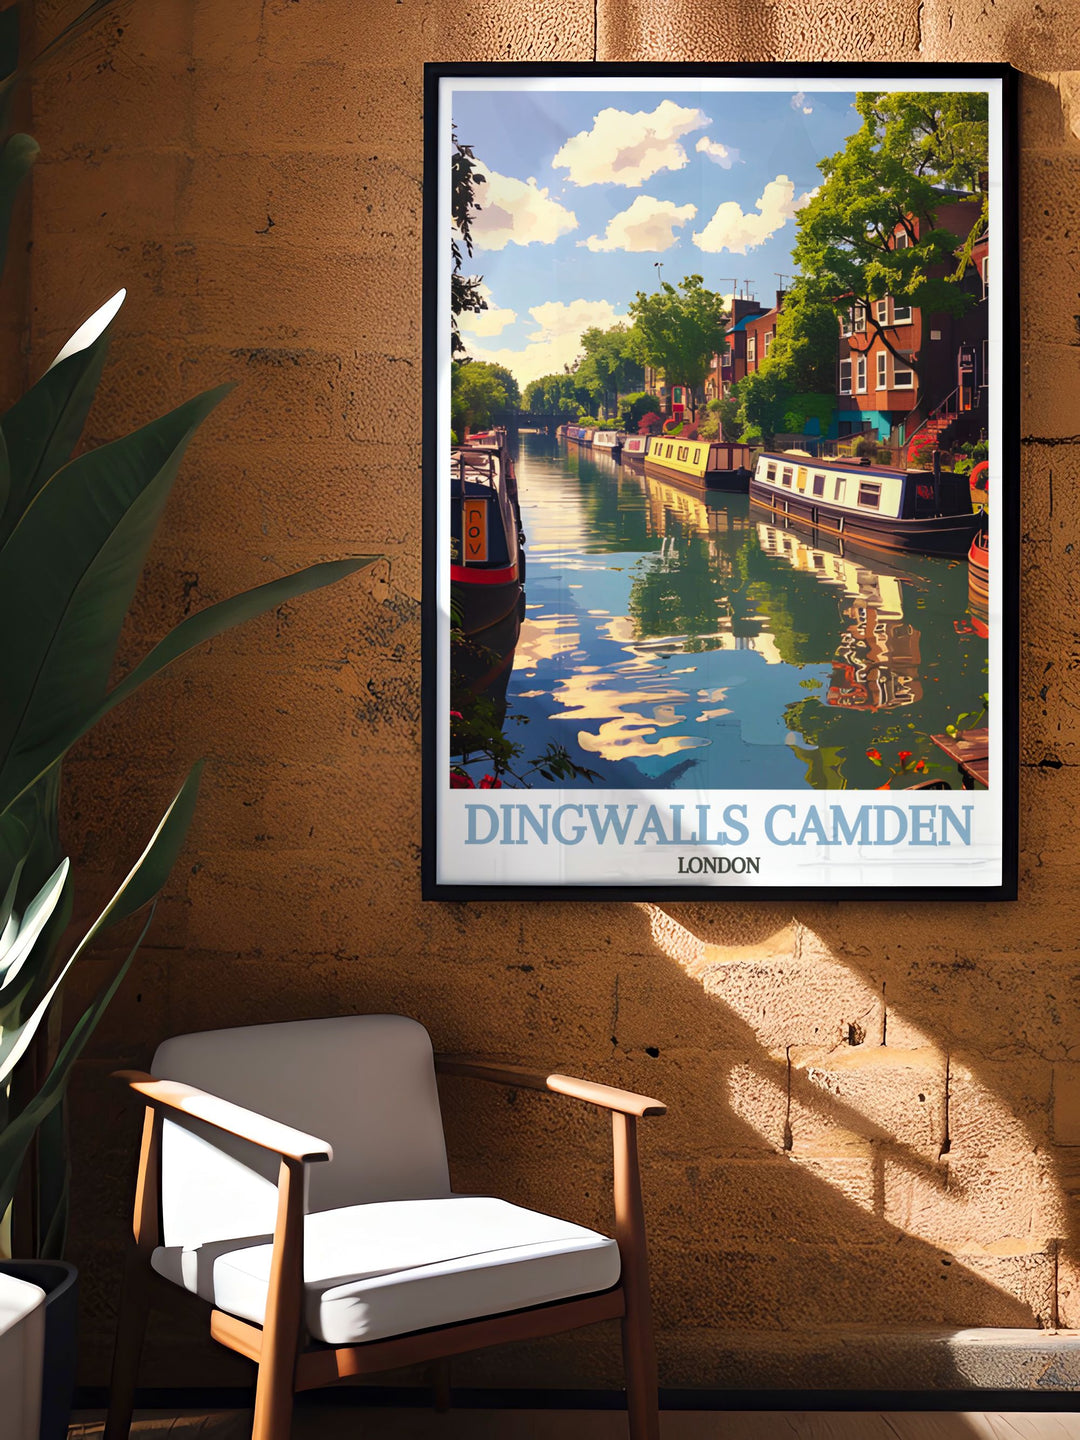 This art print of Dingwalls Camden showcases the venues rich musical heritage and lively atmosphere, making it a perfect piece for fans of live music and history.